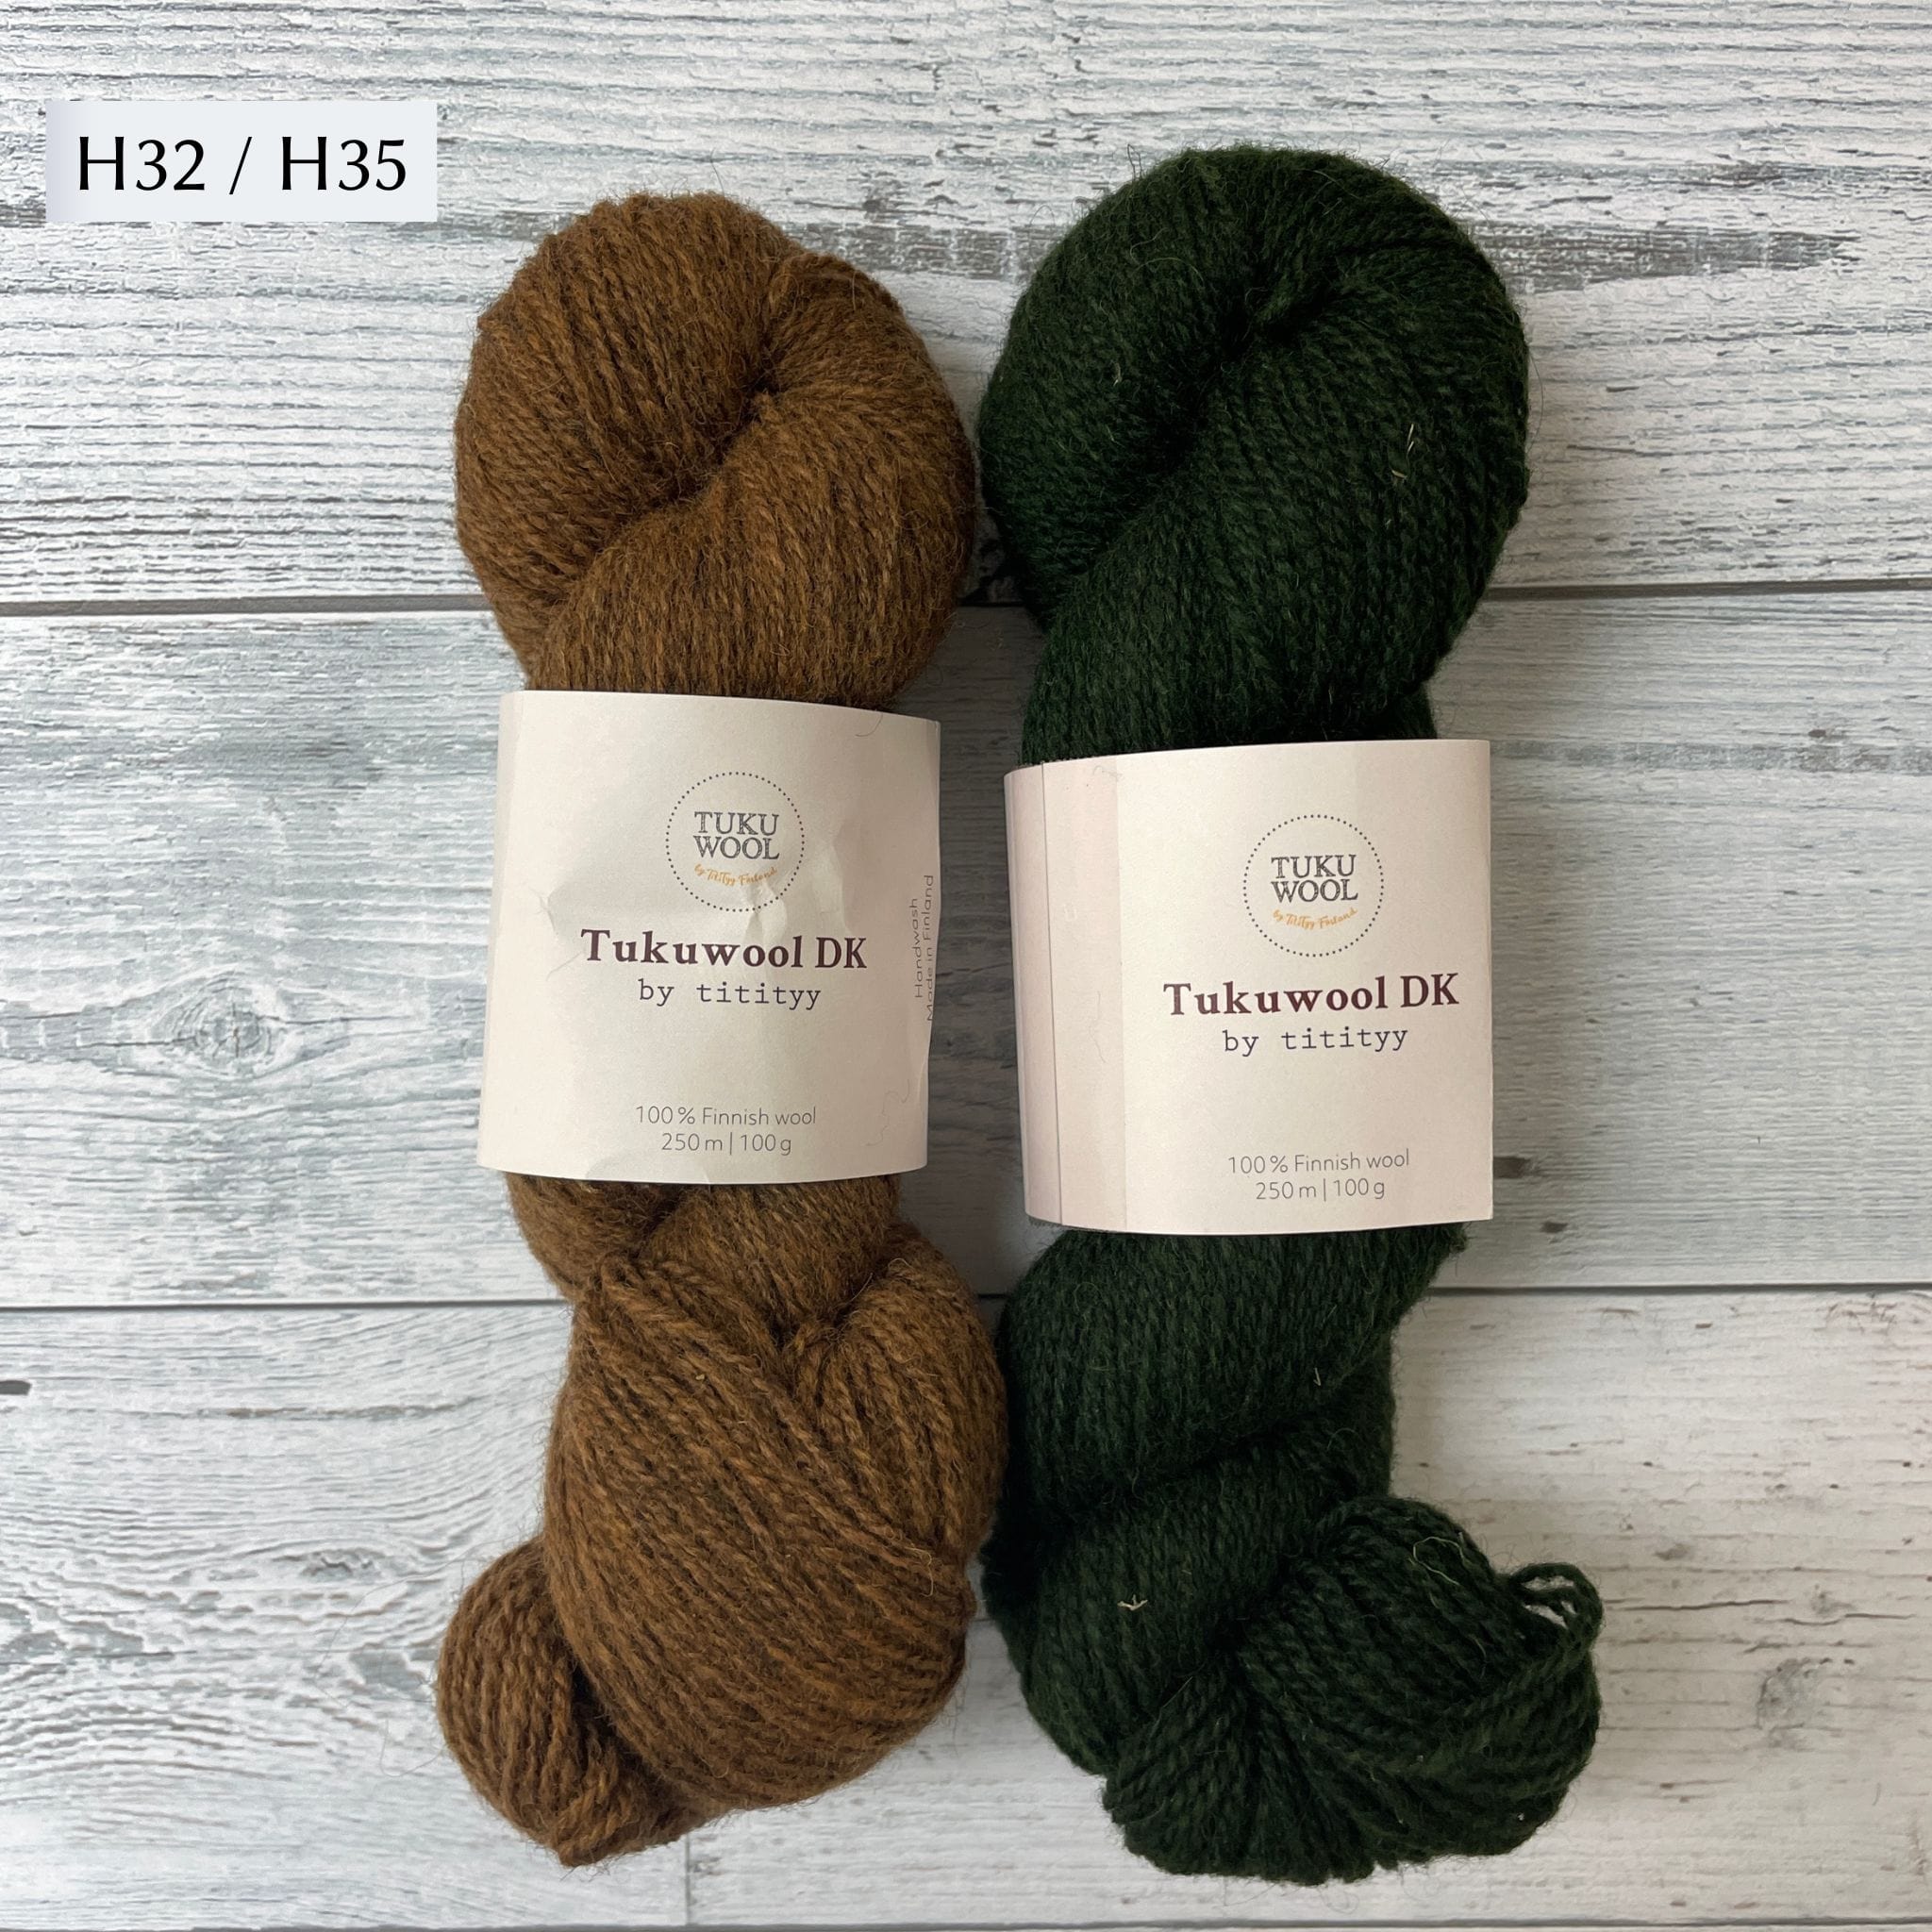 Two Skeins of Tukuwool DK shown as a colorway option for the Muisto Hat & Mittens Set. H32 (heathered gold) and H35 (heathered deep green.)